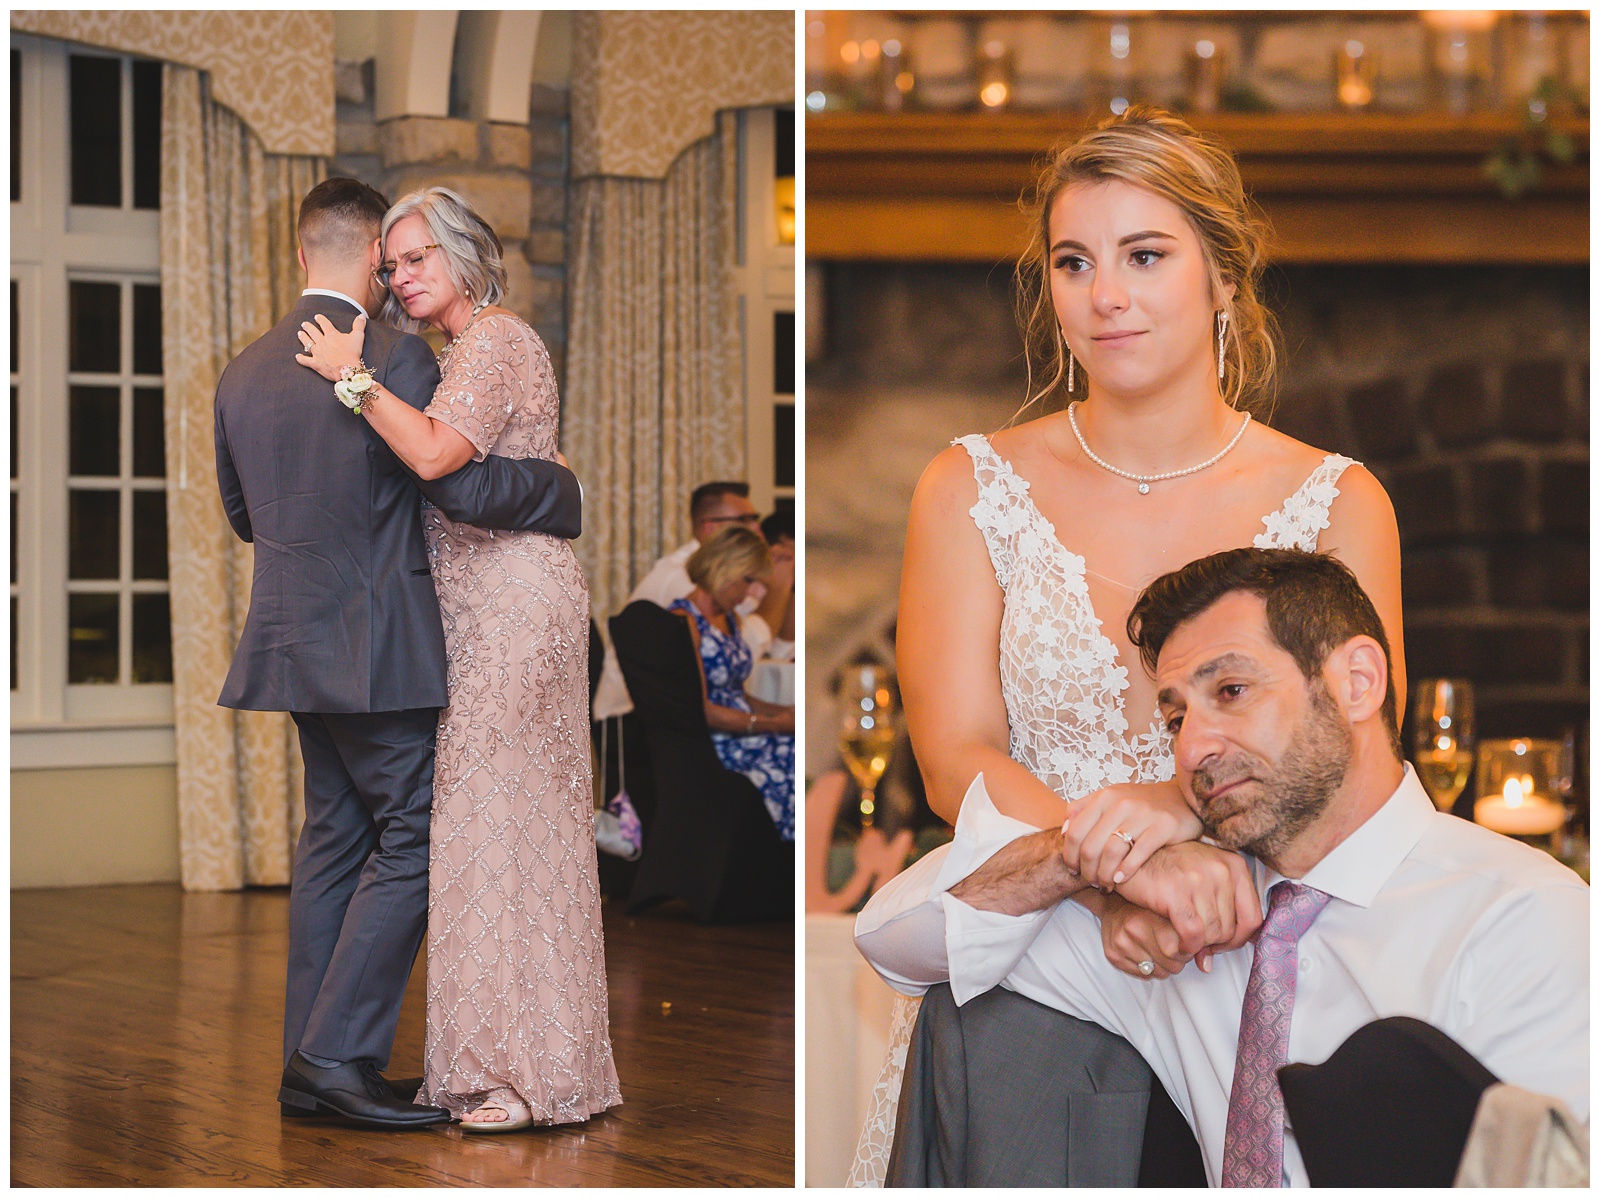 Wedding photography at The Elms Hotel & Spa in Excelsior Springs, Missouri, by Kansas City wedding photographers Wisdom-Watson Weddings.